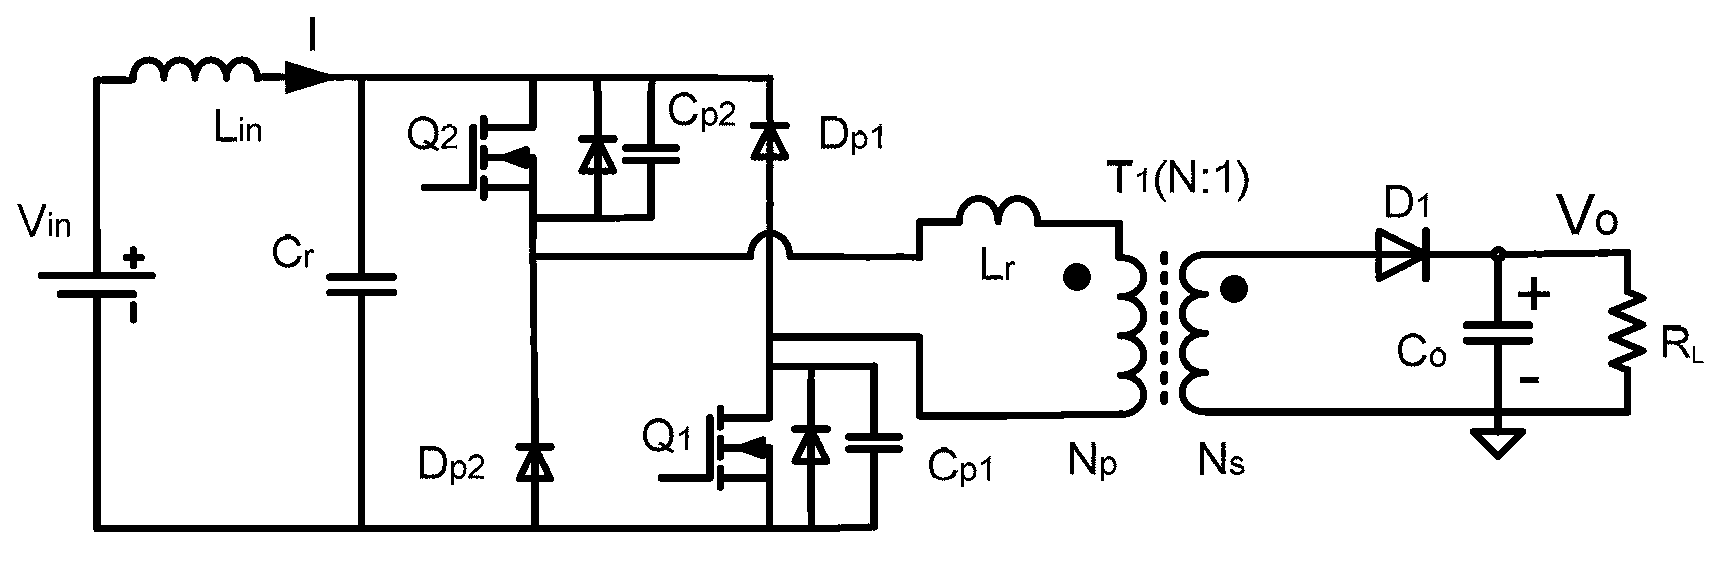 Isolated soft switching two-diode forward resonant DC / DC (direct-current/direct-current) circuit